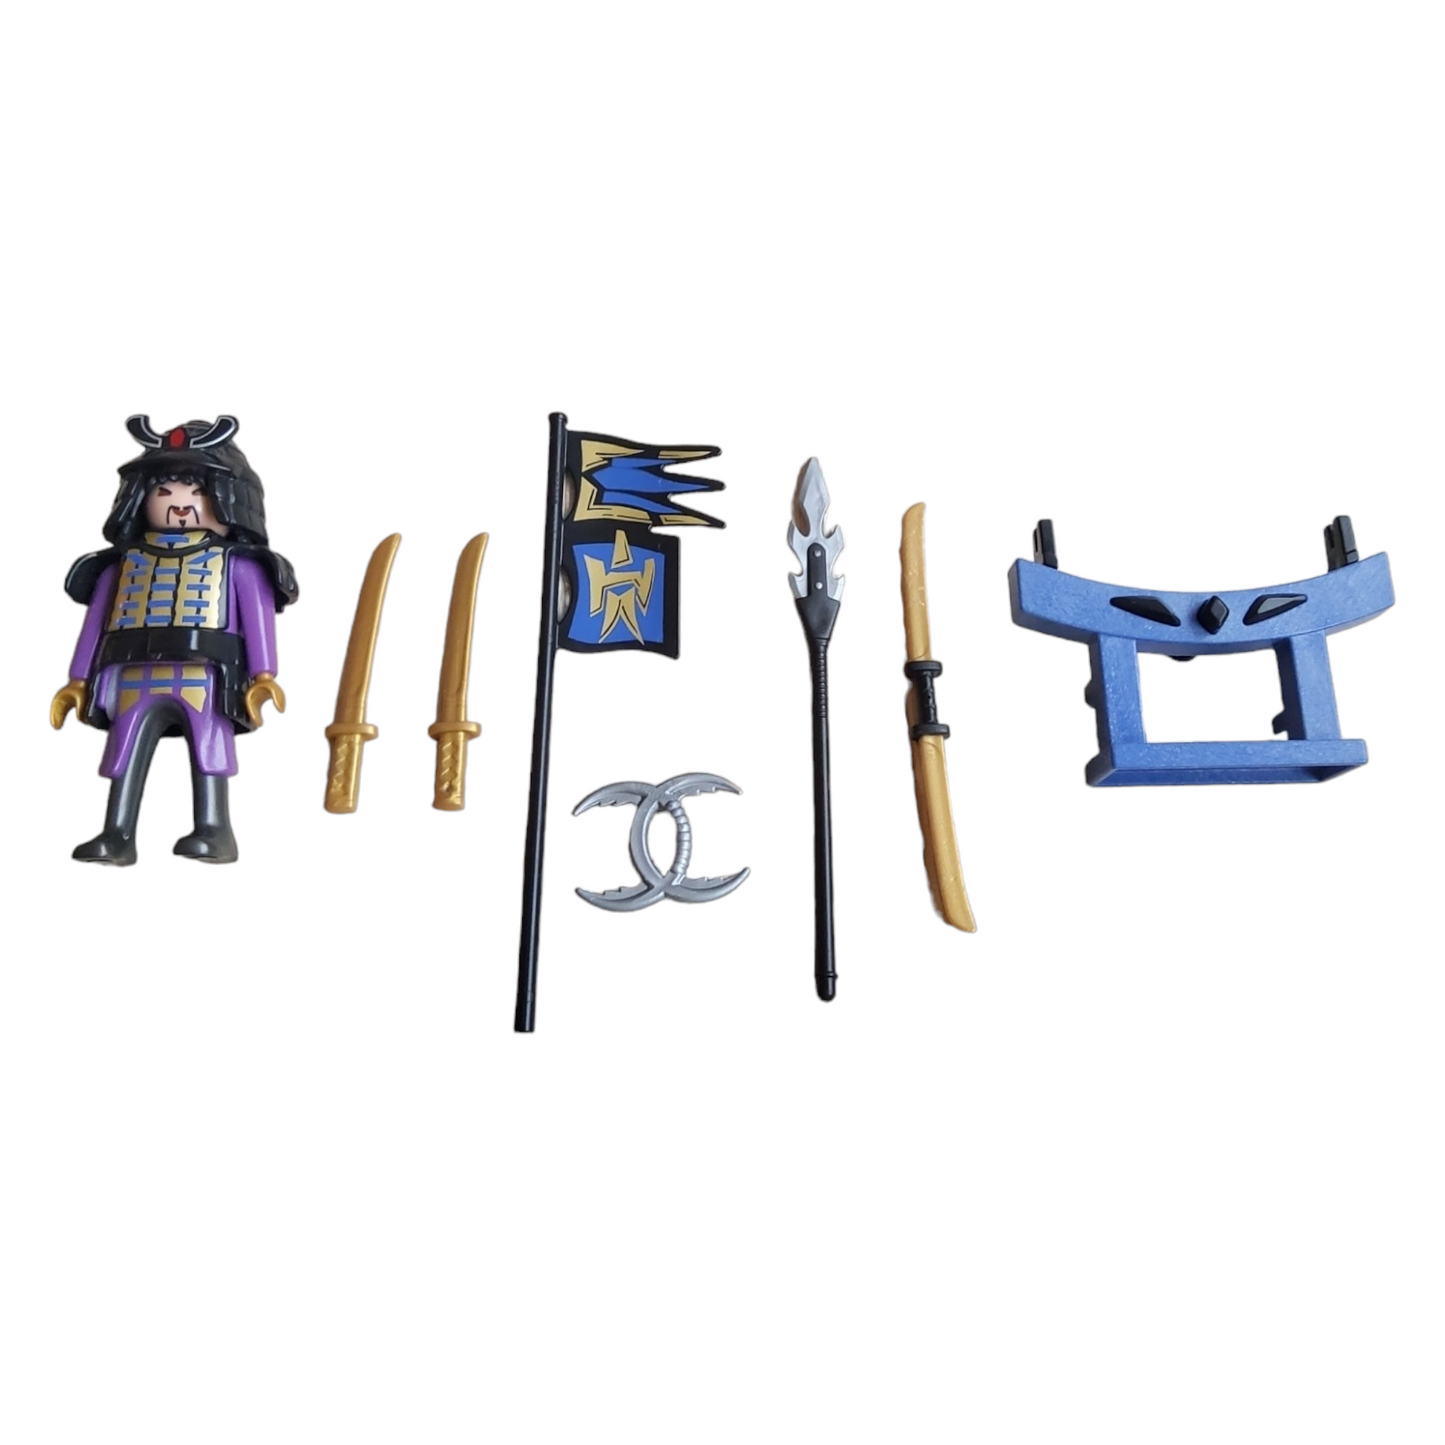 Playmobil ® Samurai with weapons Special plus figures- 47899